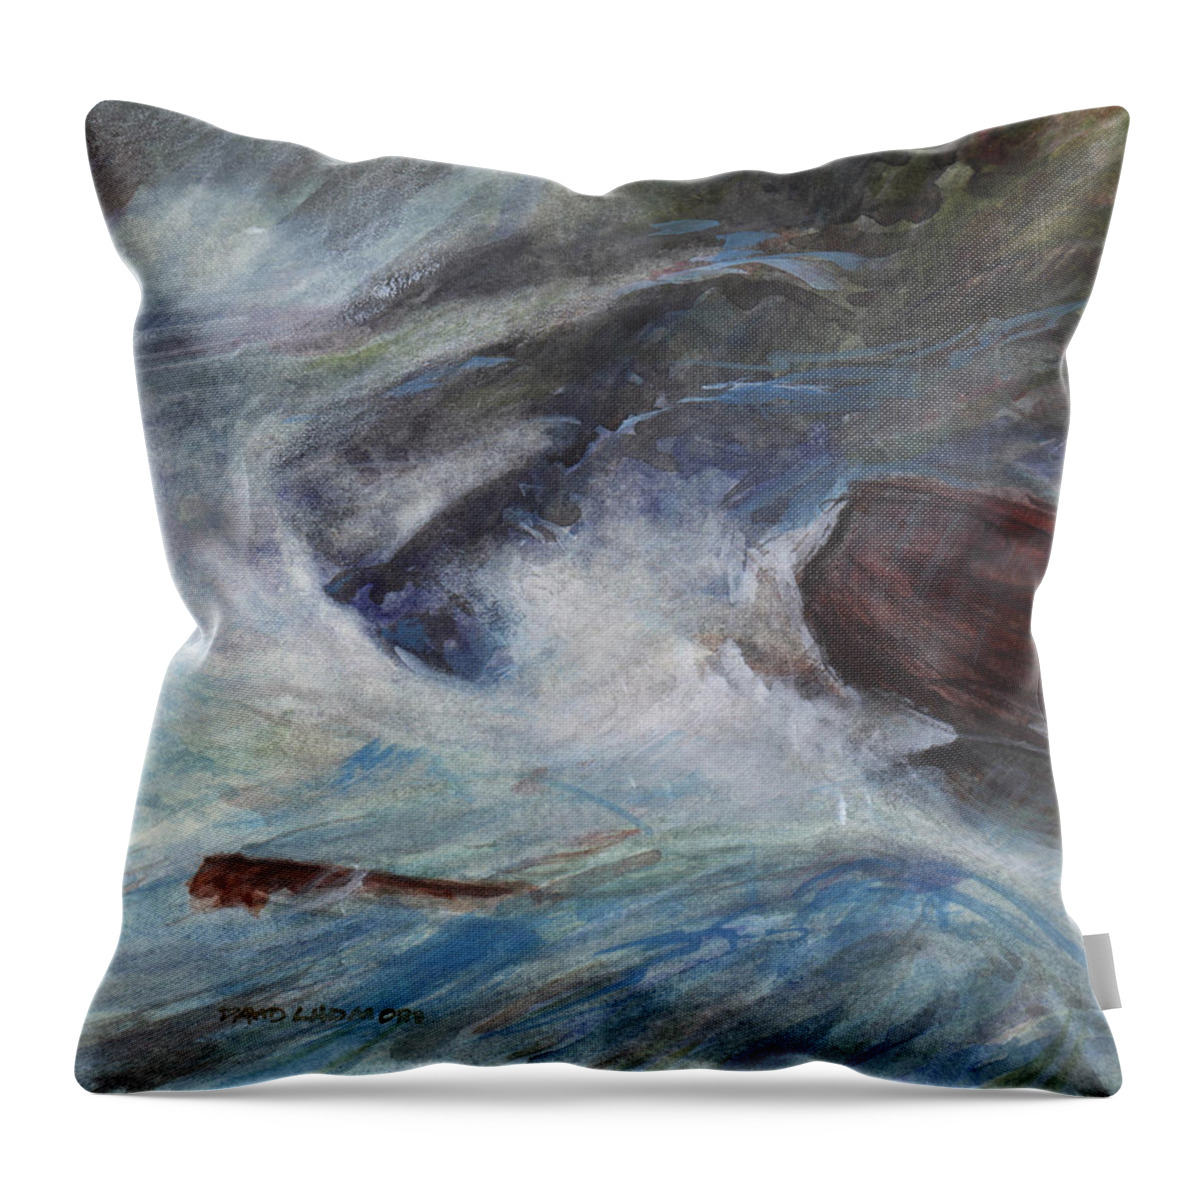 David Ladmore Throw Pillow featuring the painting Bright Storm 2 by David Ladmore